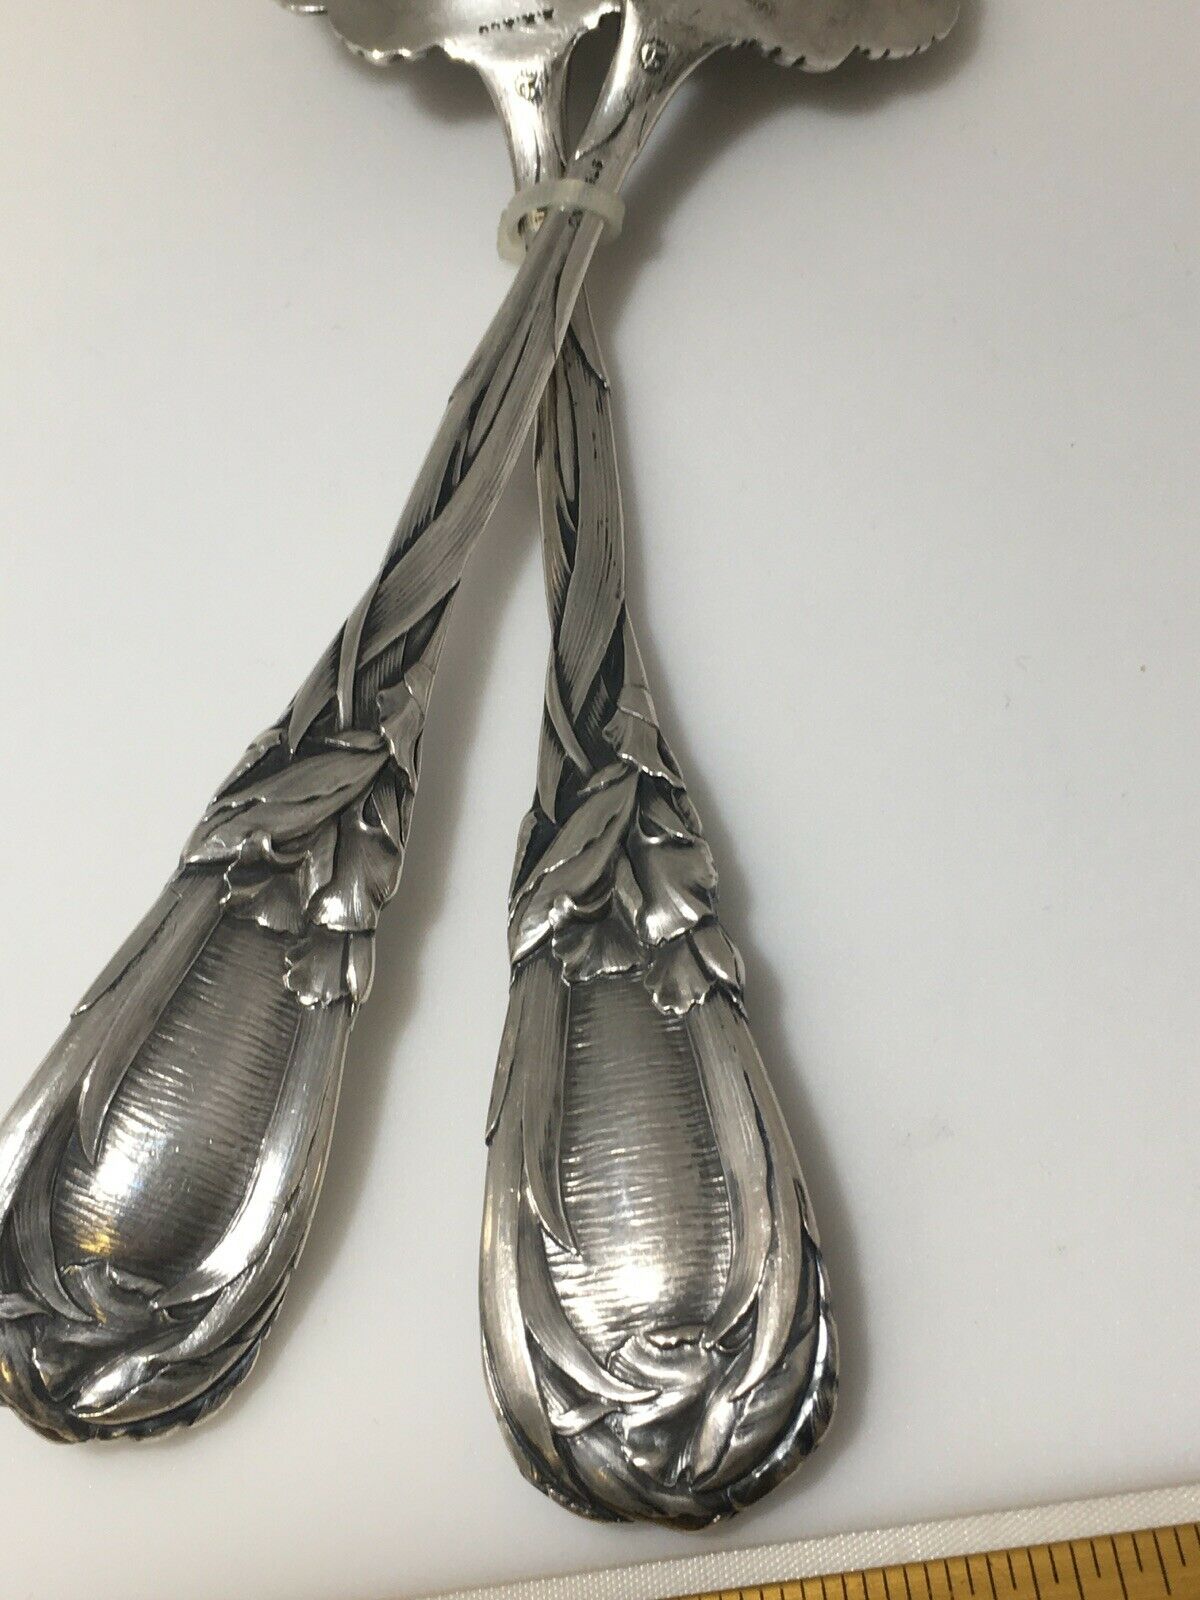 New Art By Durgin 2 Pc Salad Serving Set Spoon & Fork Heavy Over 12 Oz No Mono